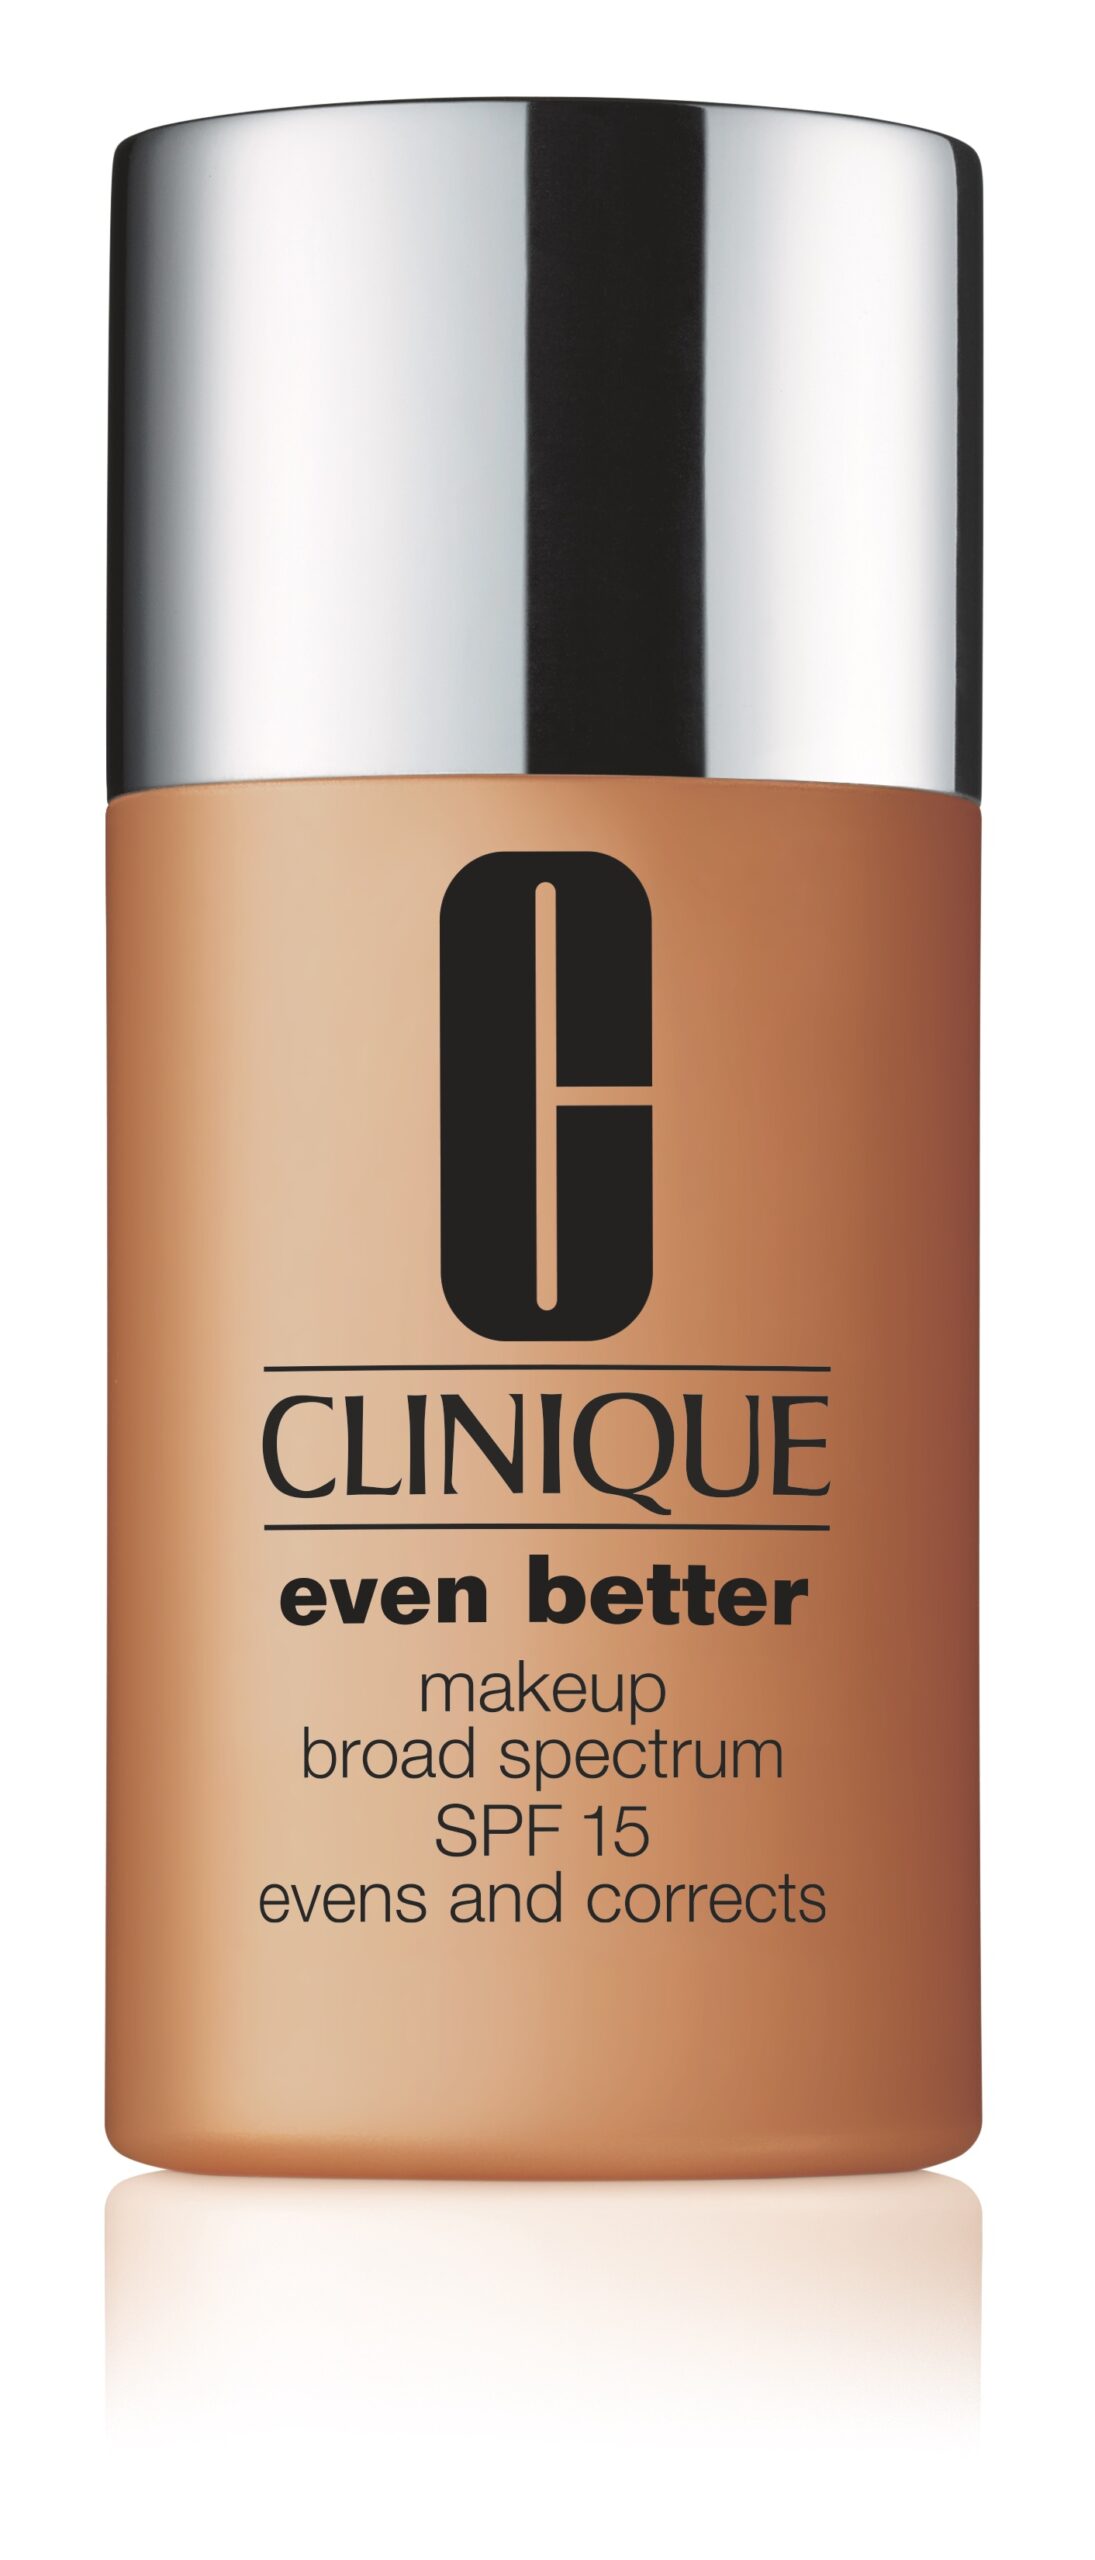 Clinique Even Better foundation with SPF in warm medium tan shade.